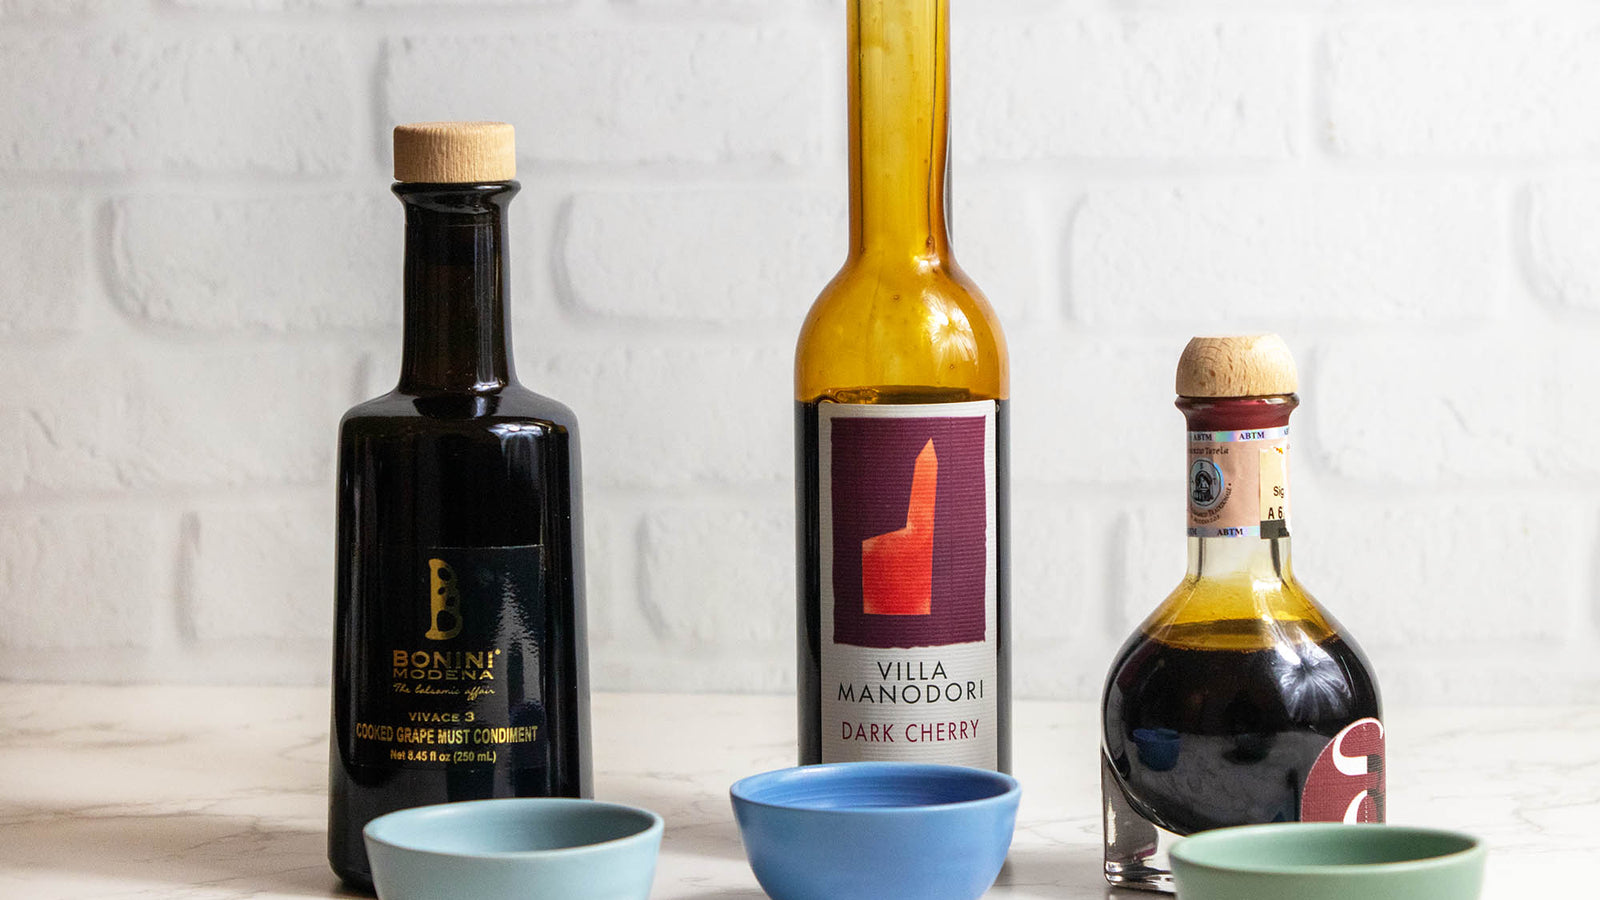 How To Have A Balsamic Tasting At Home